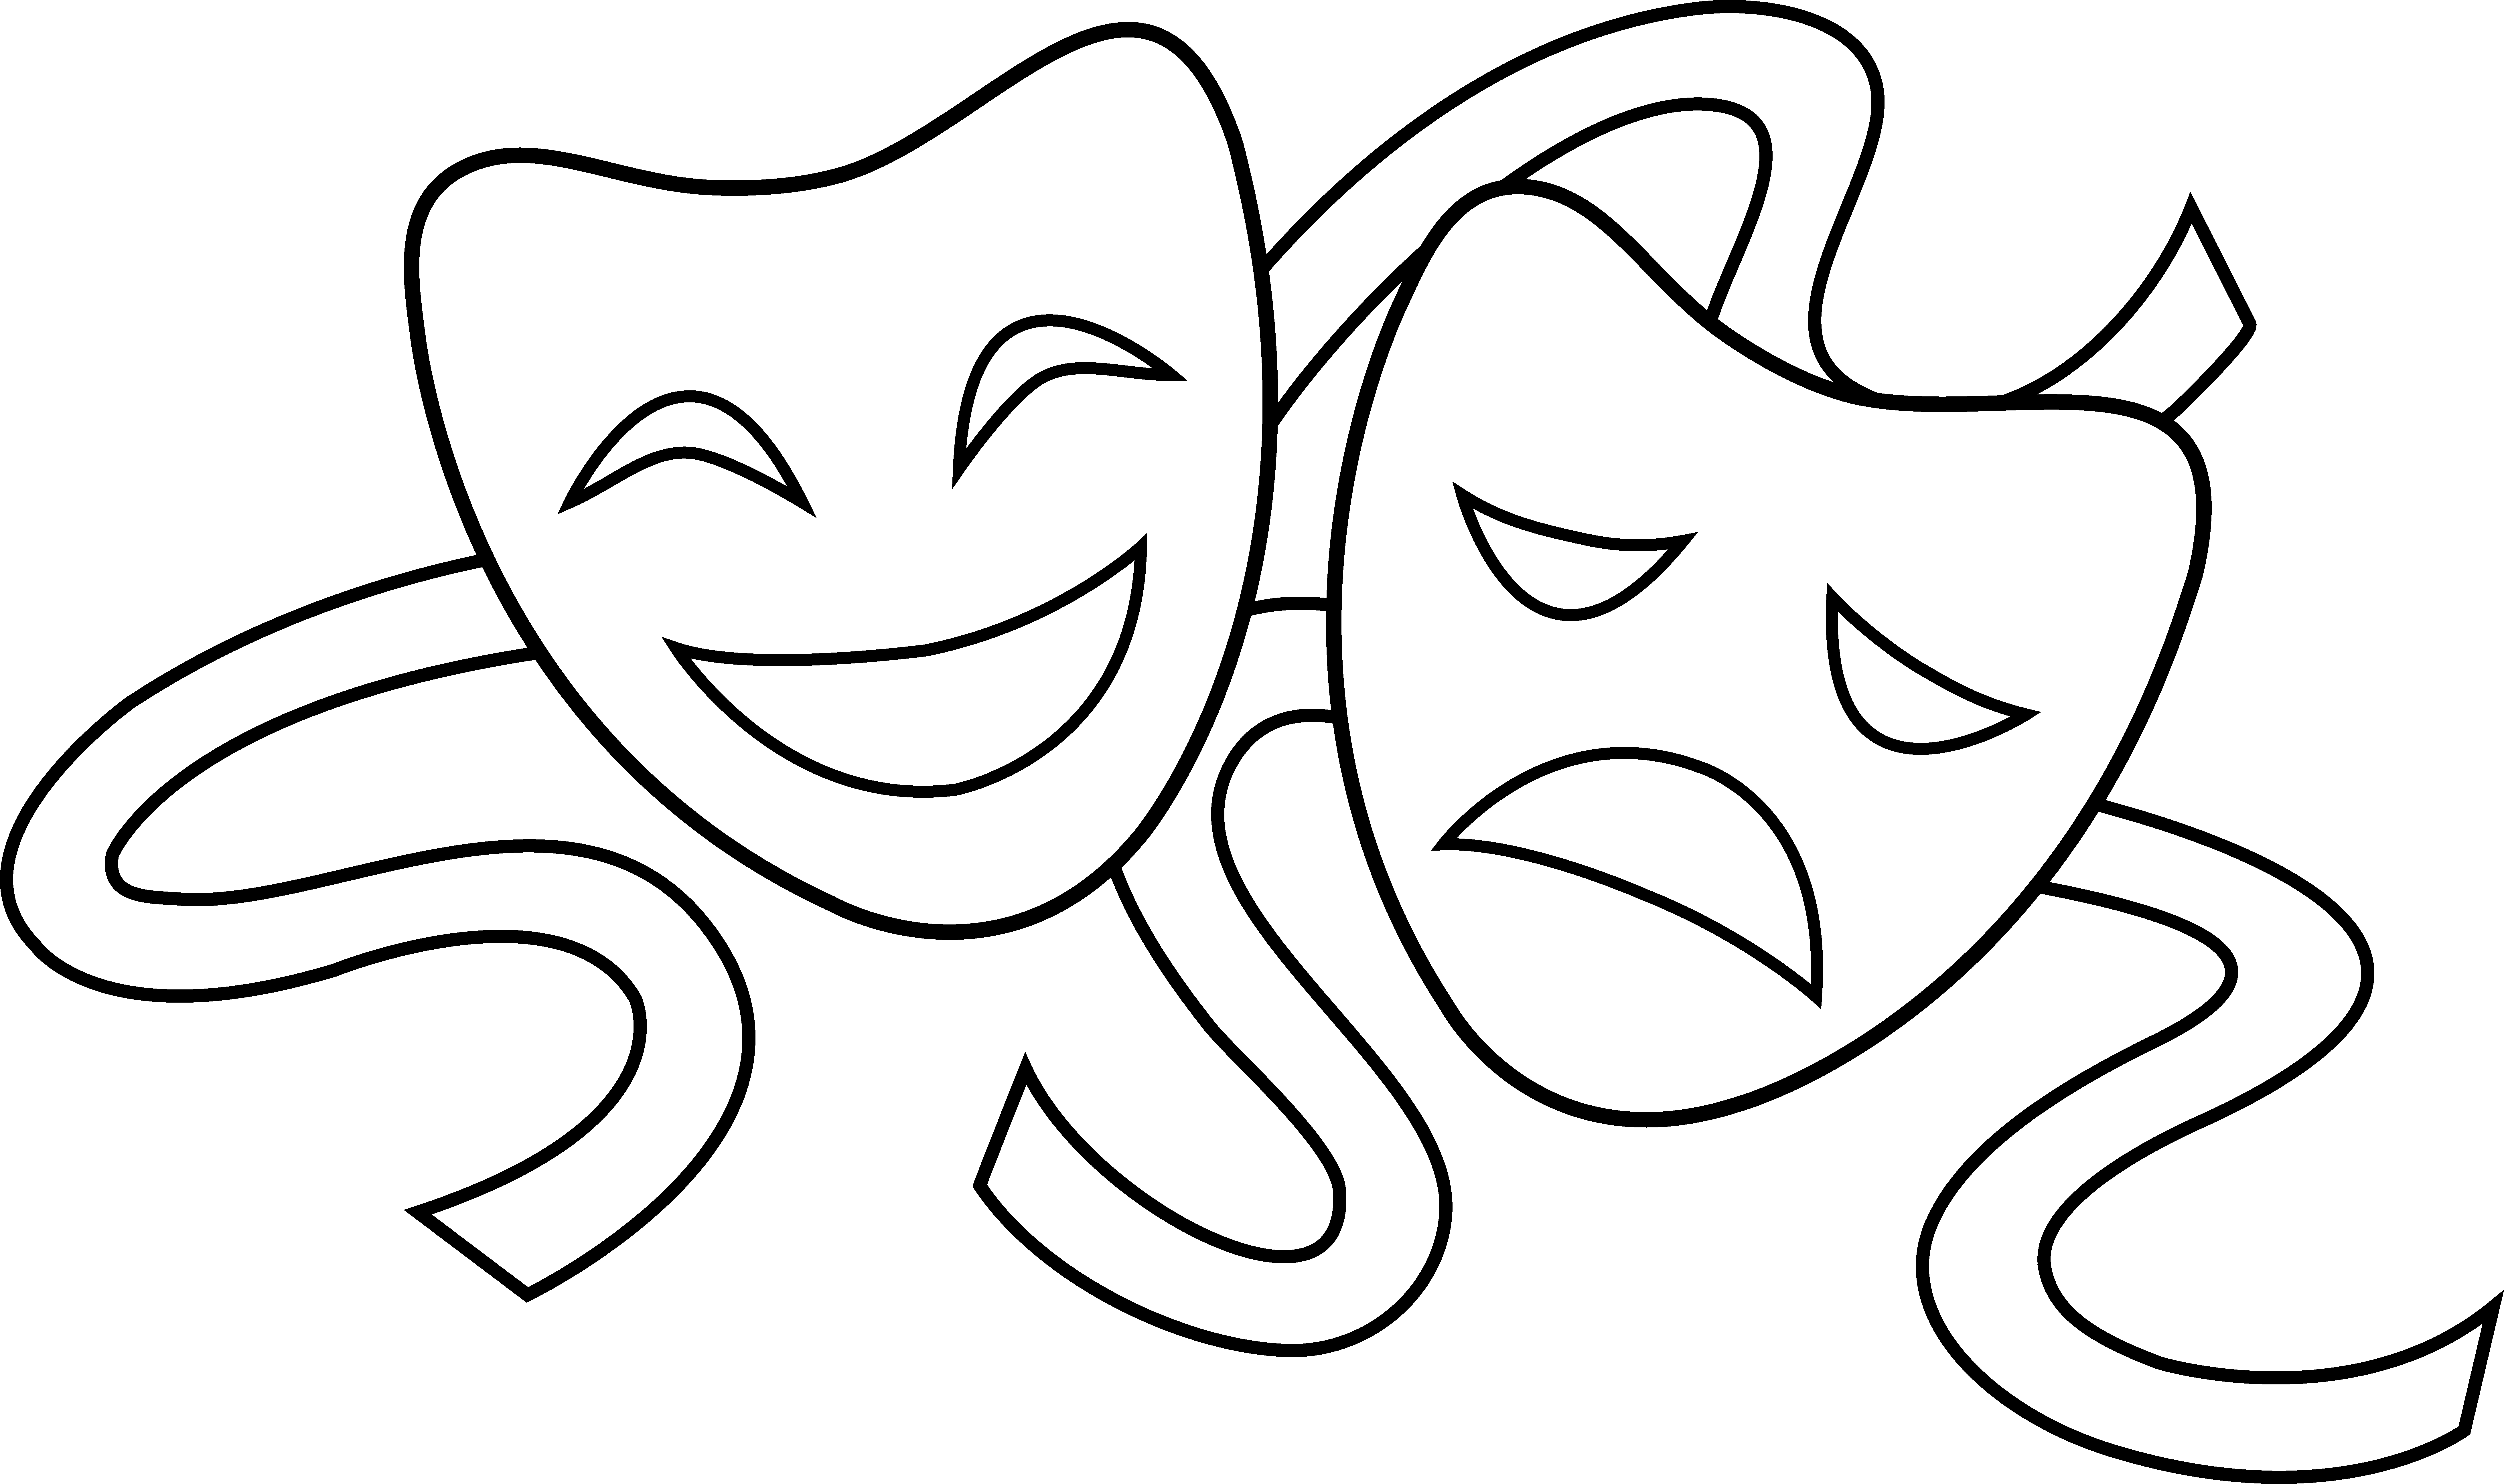 How To Draw Drama Masks Cliparts.co